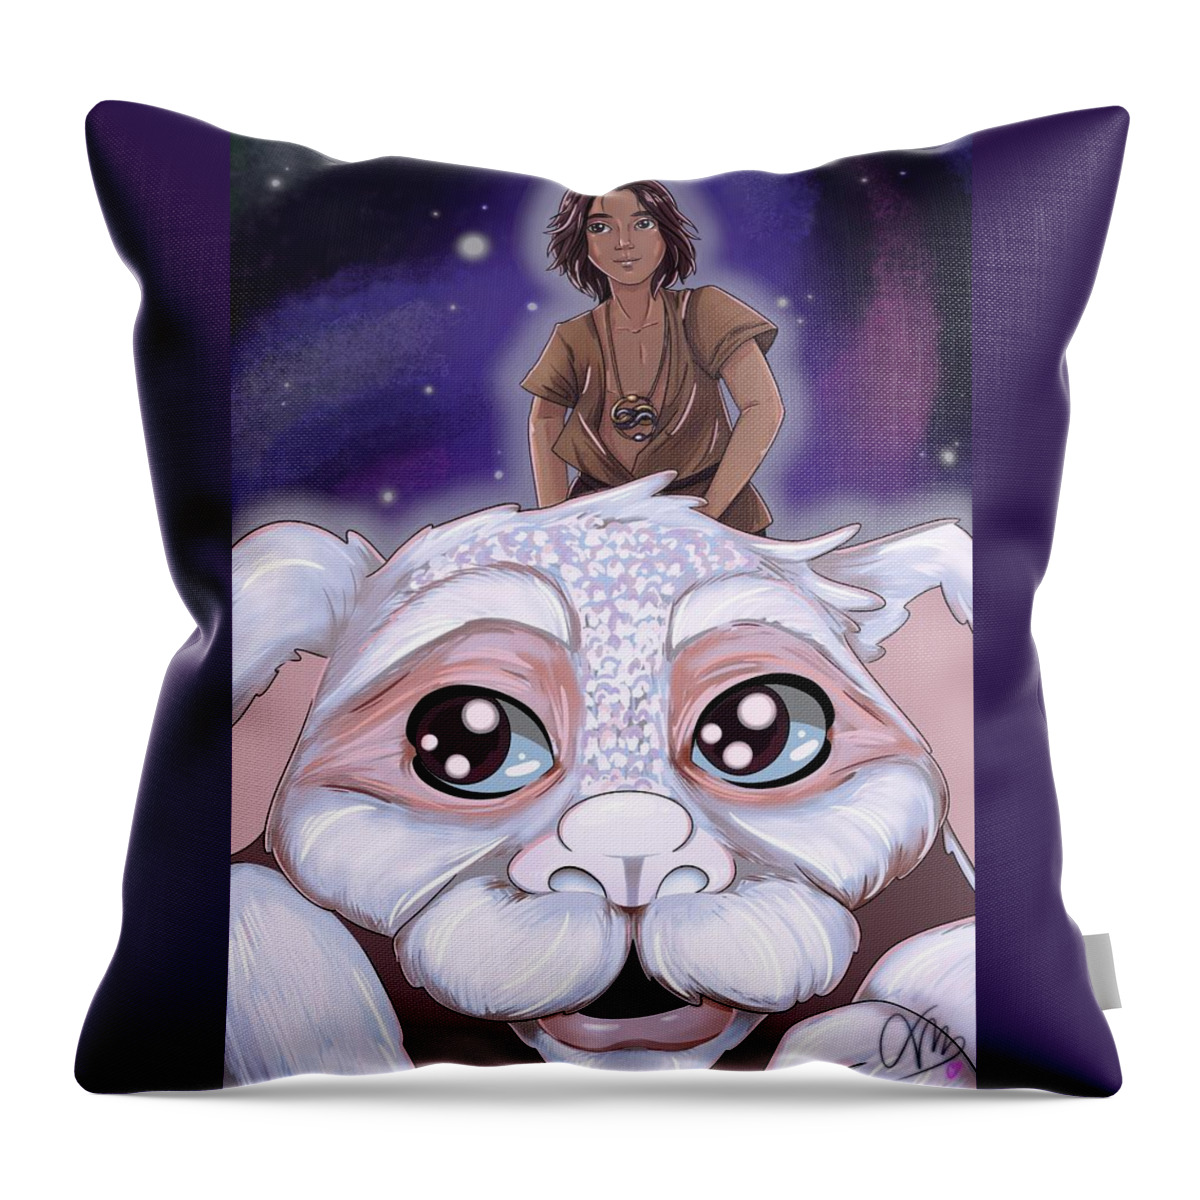 This Digital Drawing Is A Fanart Piece Of The Classic 80's Movie The Neverending Story. In This Drawing You Can See The Characters Mighty Warrior Atreyu And The Lucky Dragon Falkor. Throw Pillow featuring the digital art Neverending Story Fanart by Tania Brochado